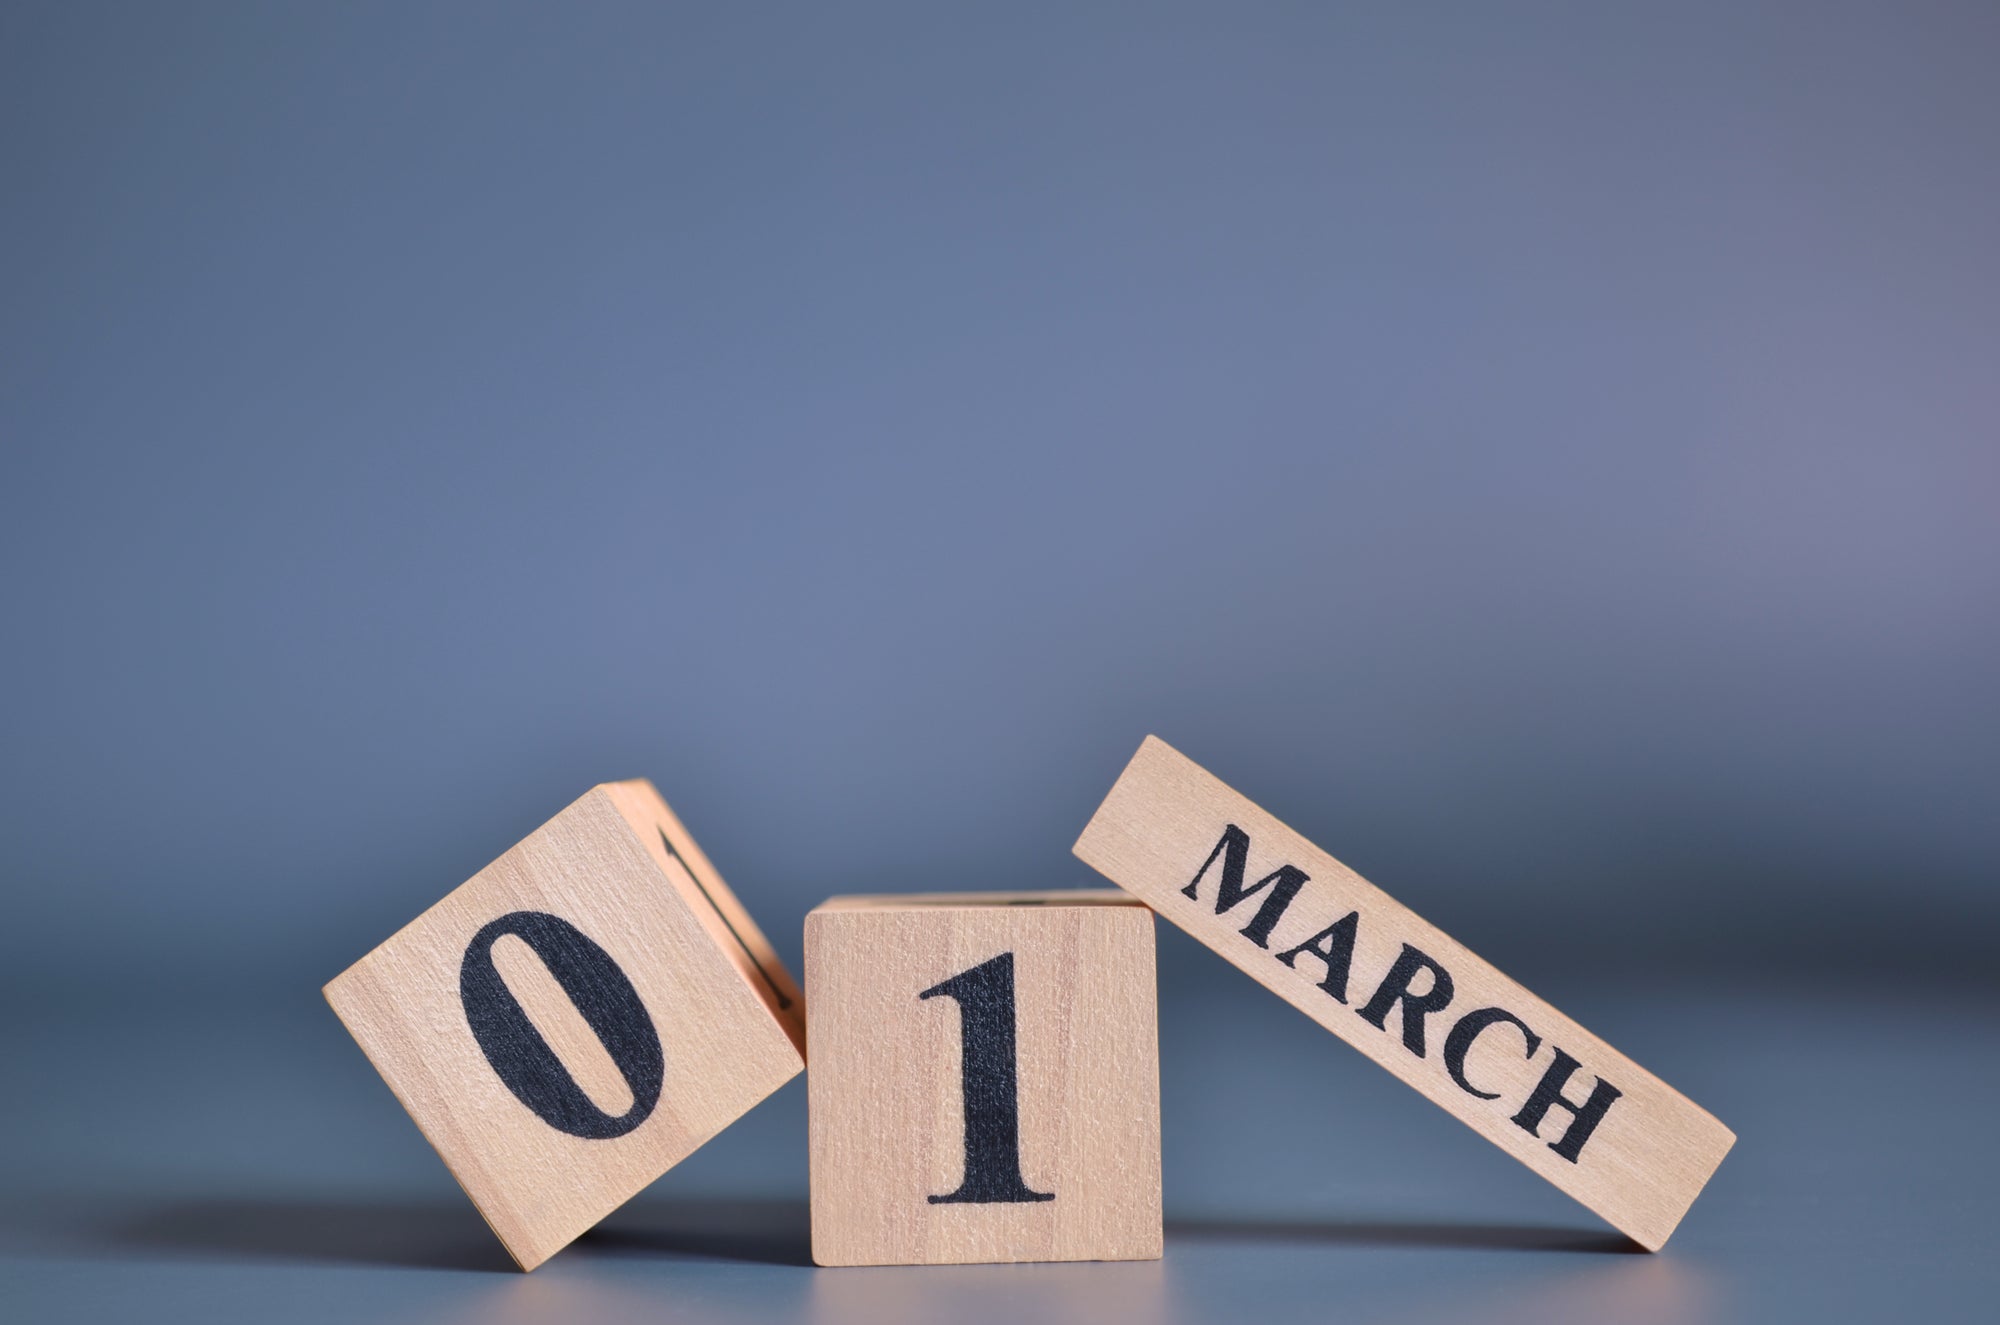 March 1, 2022 Sales Tax Changes